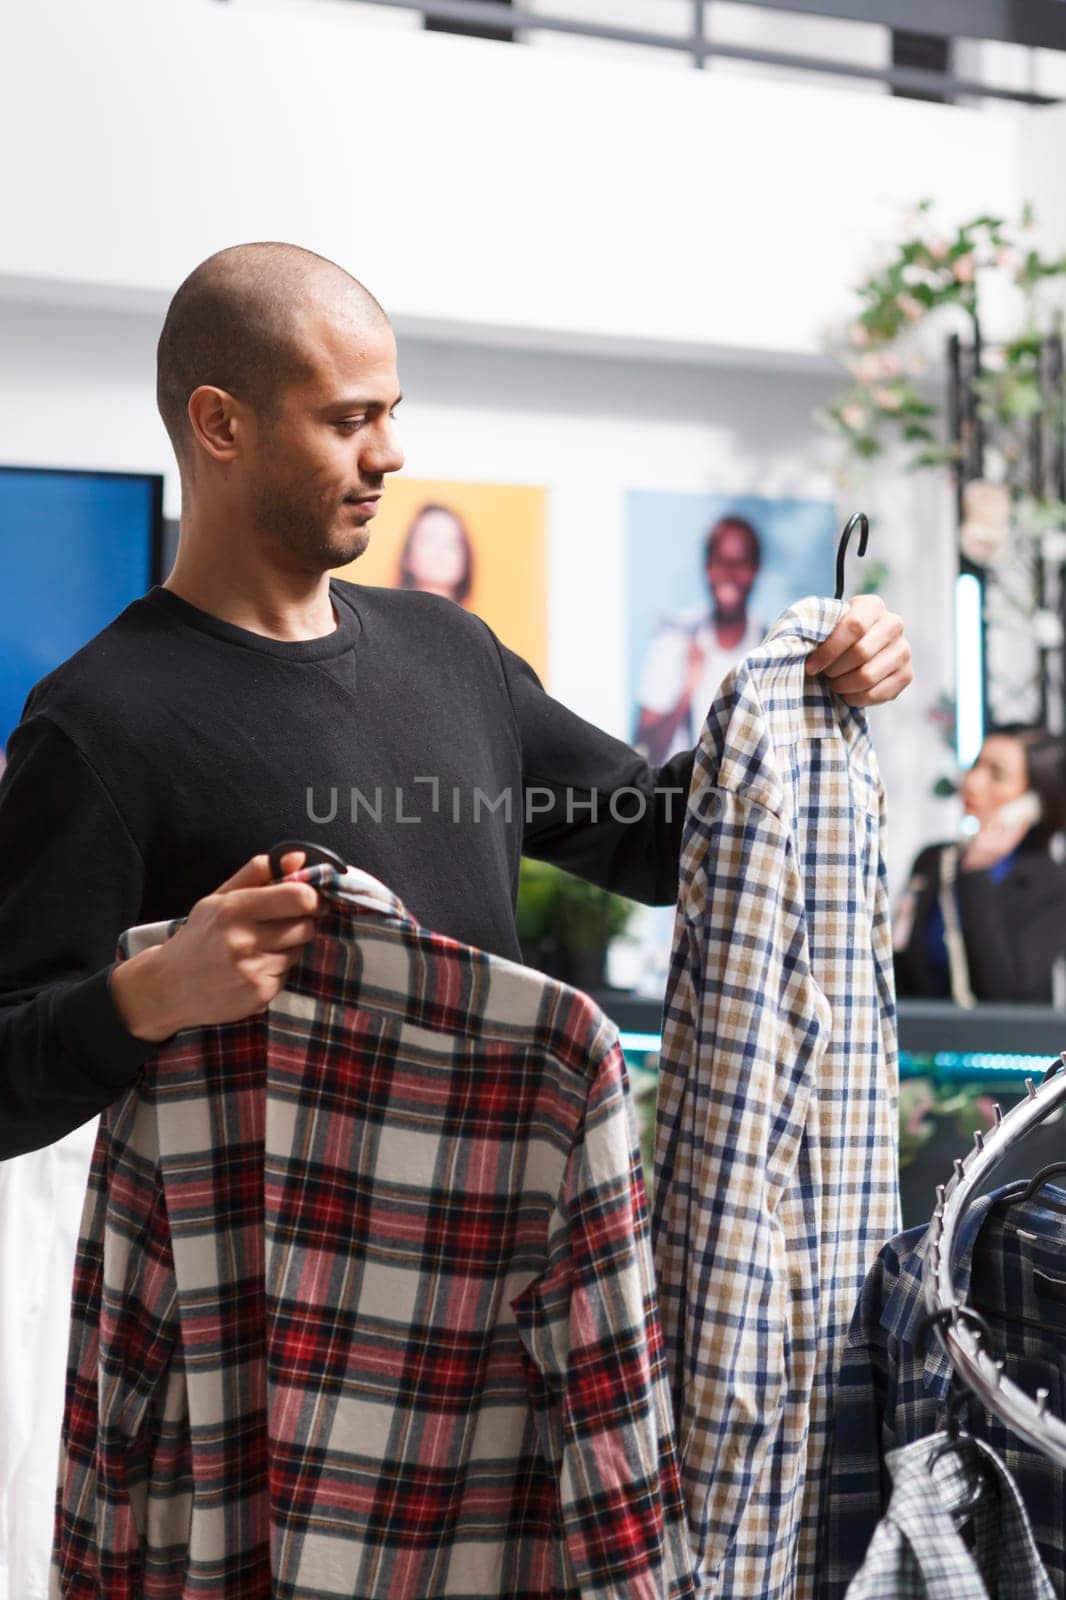 Shopping mall boutique arab man customer browsing plaid shirts and holding two outfits on hangers. Clothing store client choosing casual menswear apparel, considering style and fit